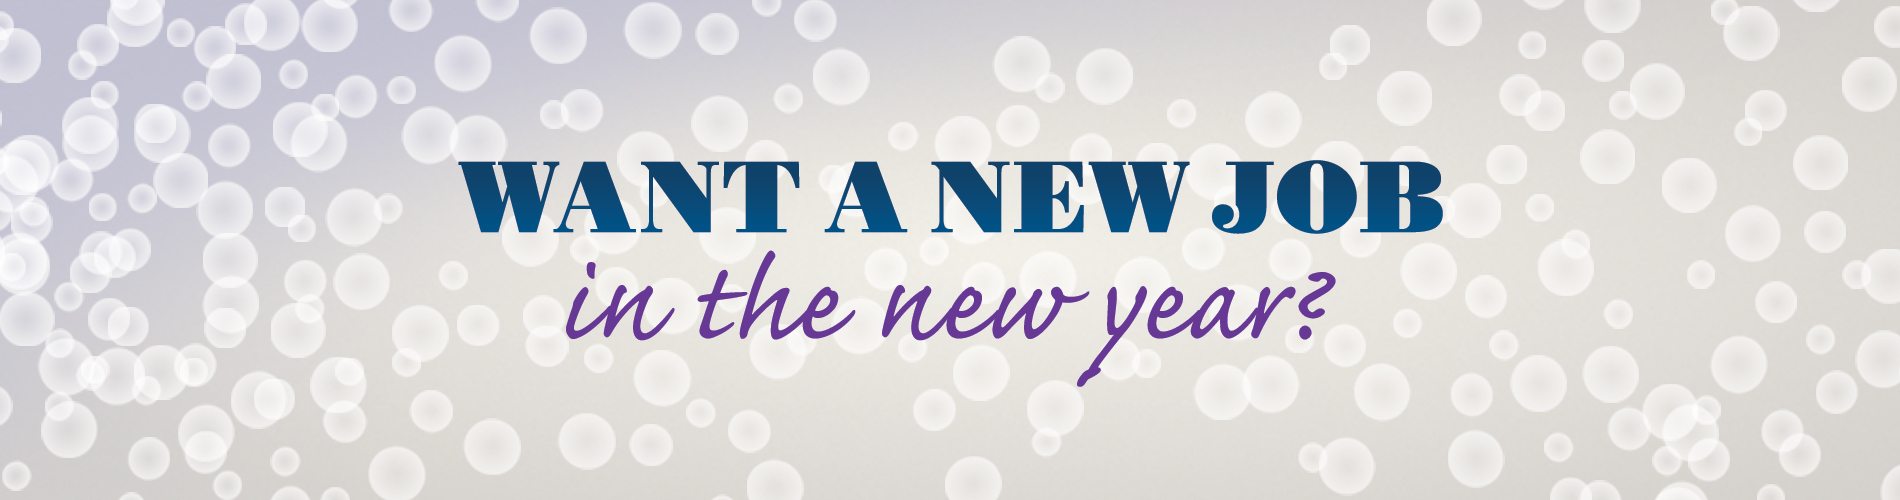 New Year - New Job Home Page Banner - Version 4